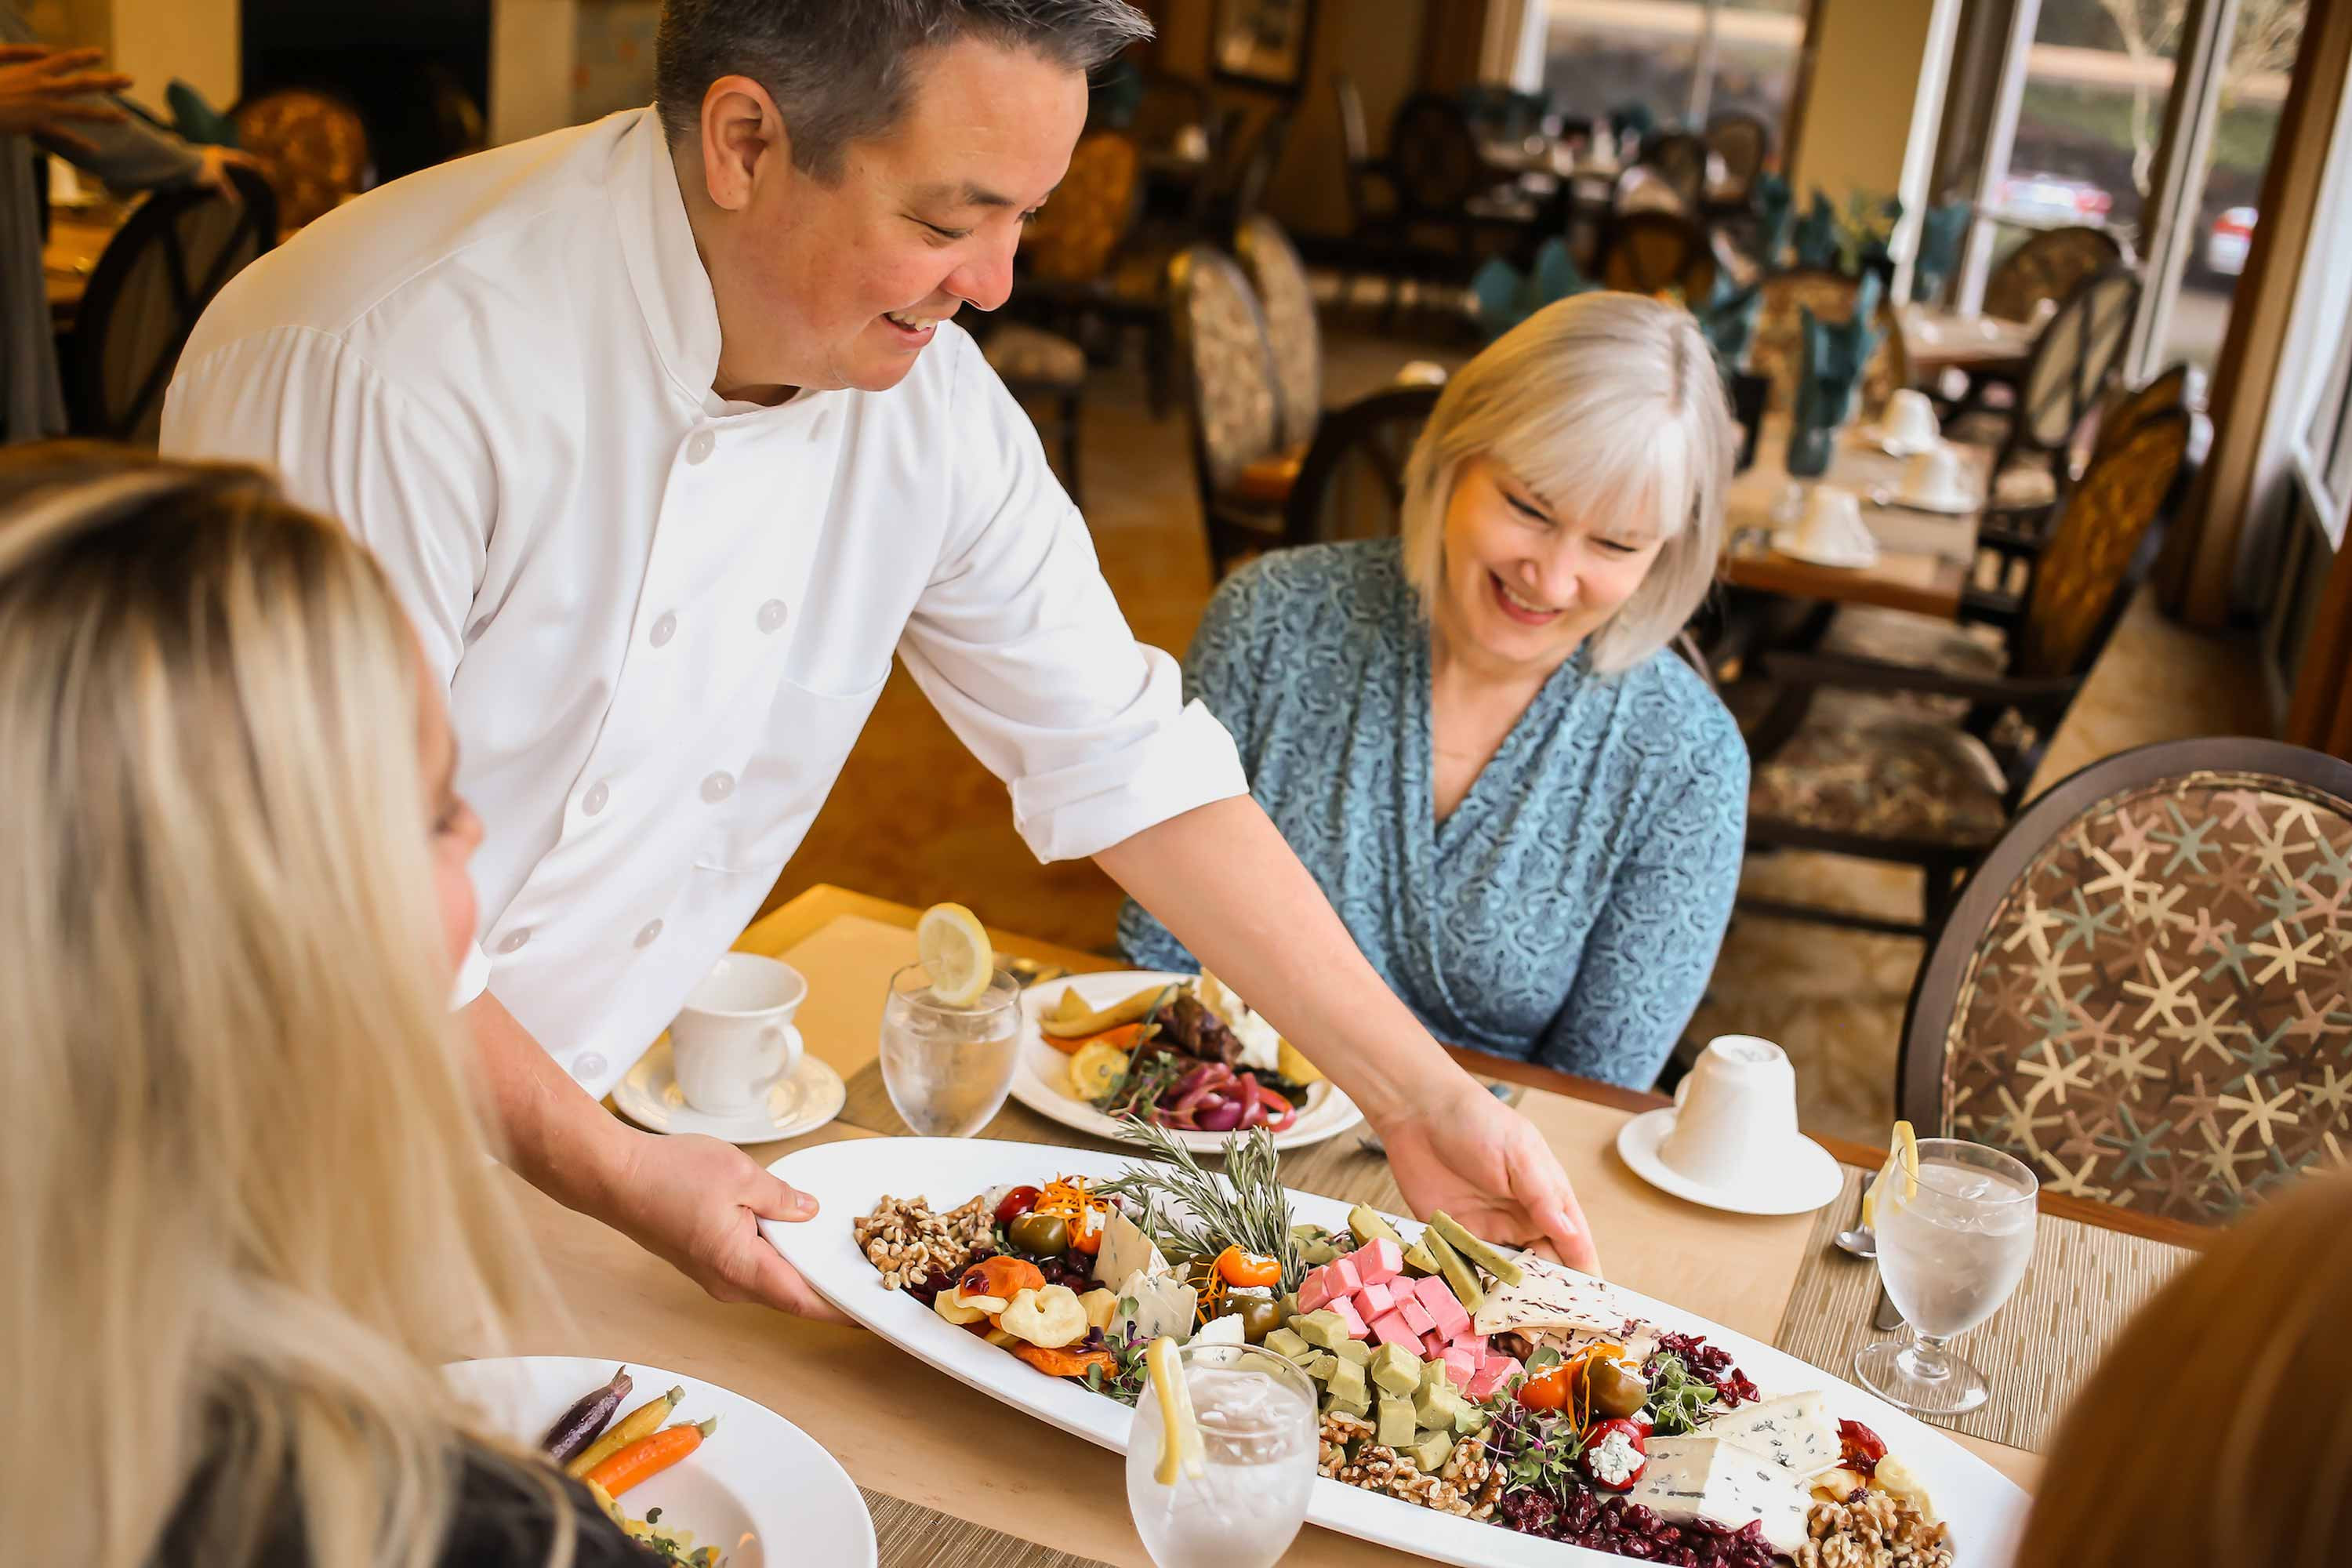 Cristwood's chef lays out platter of food for diners